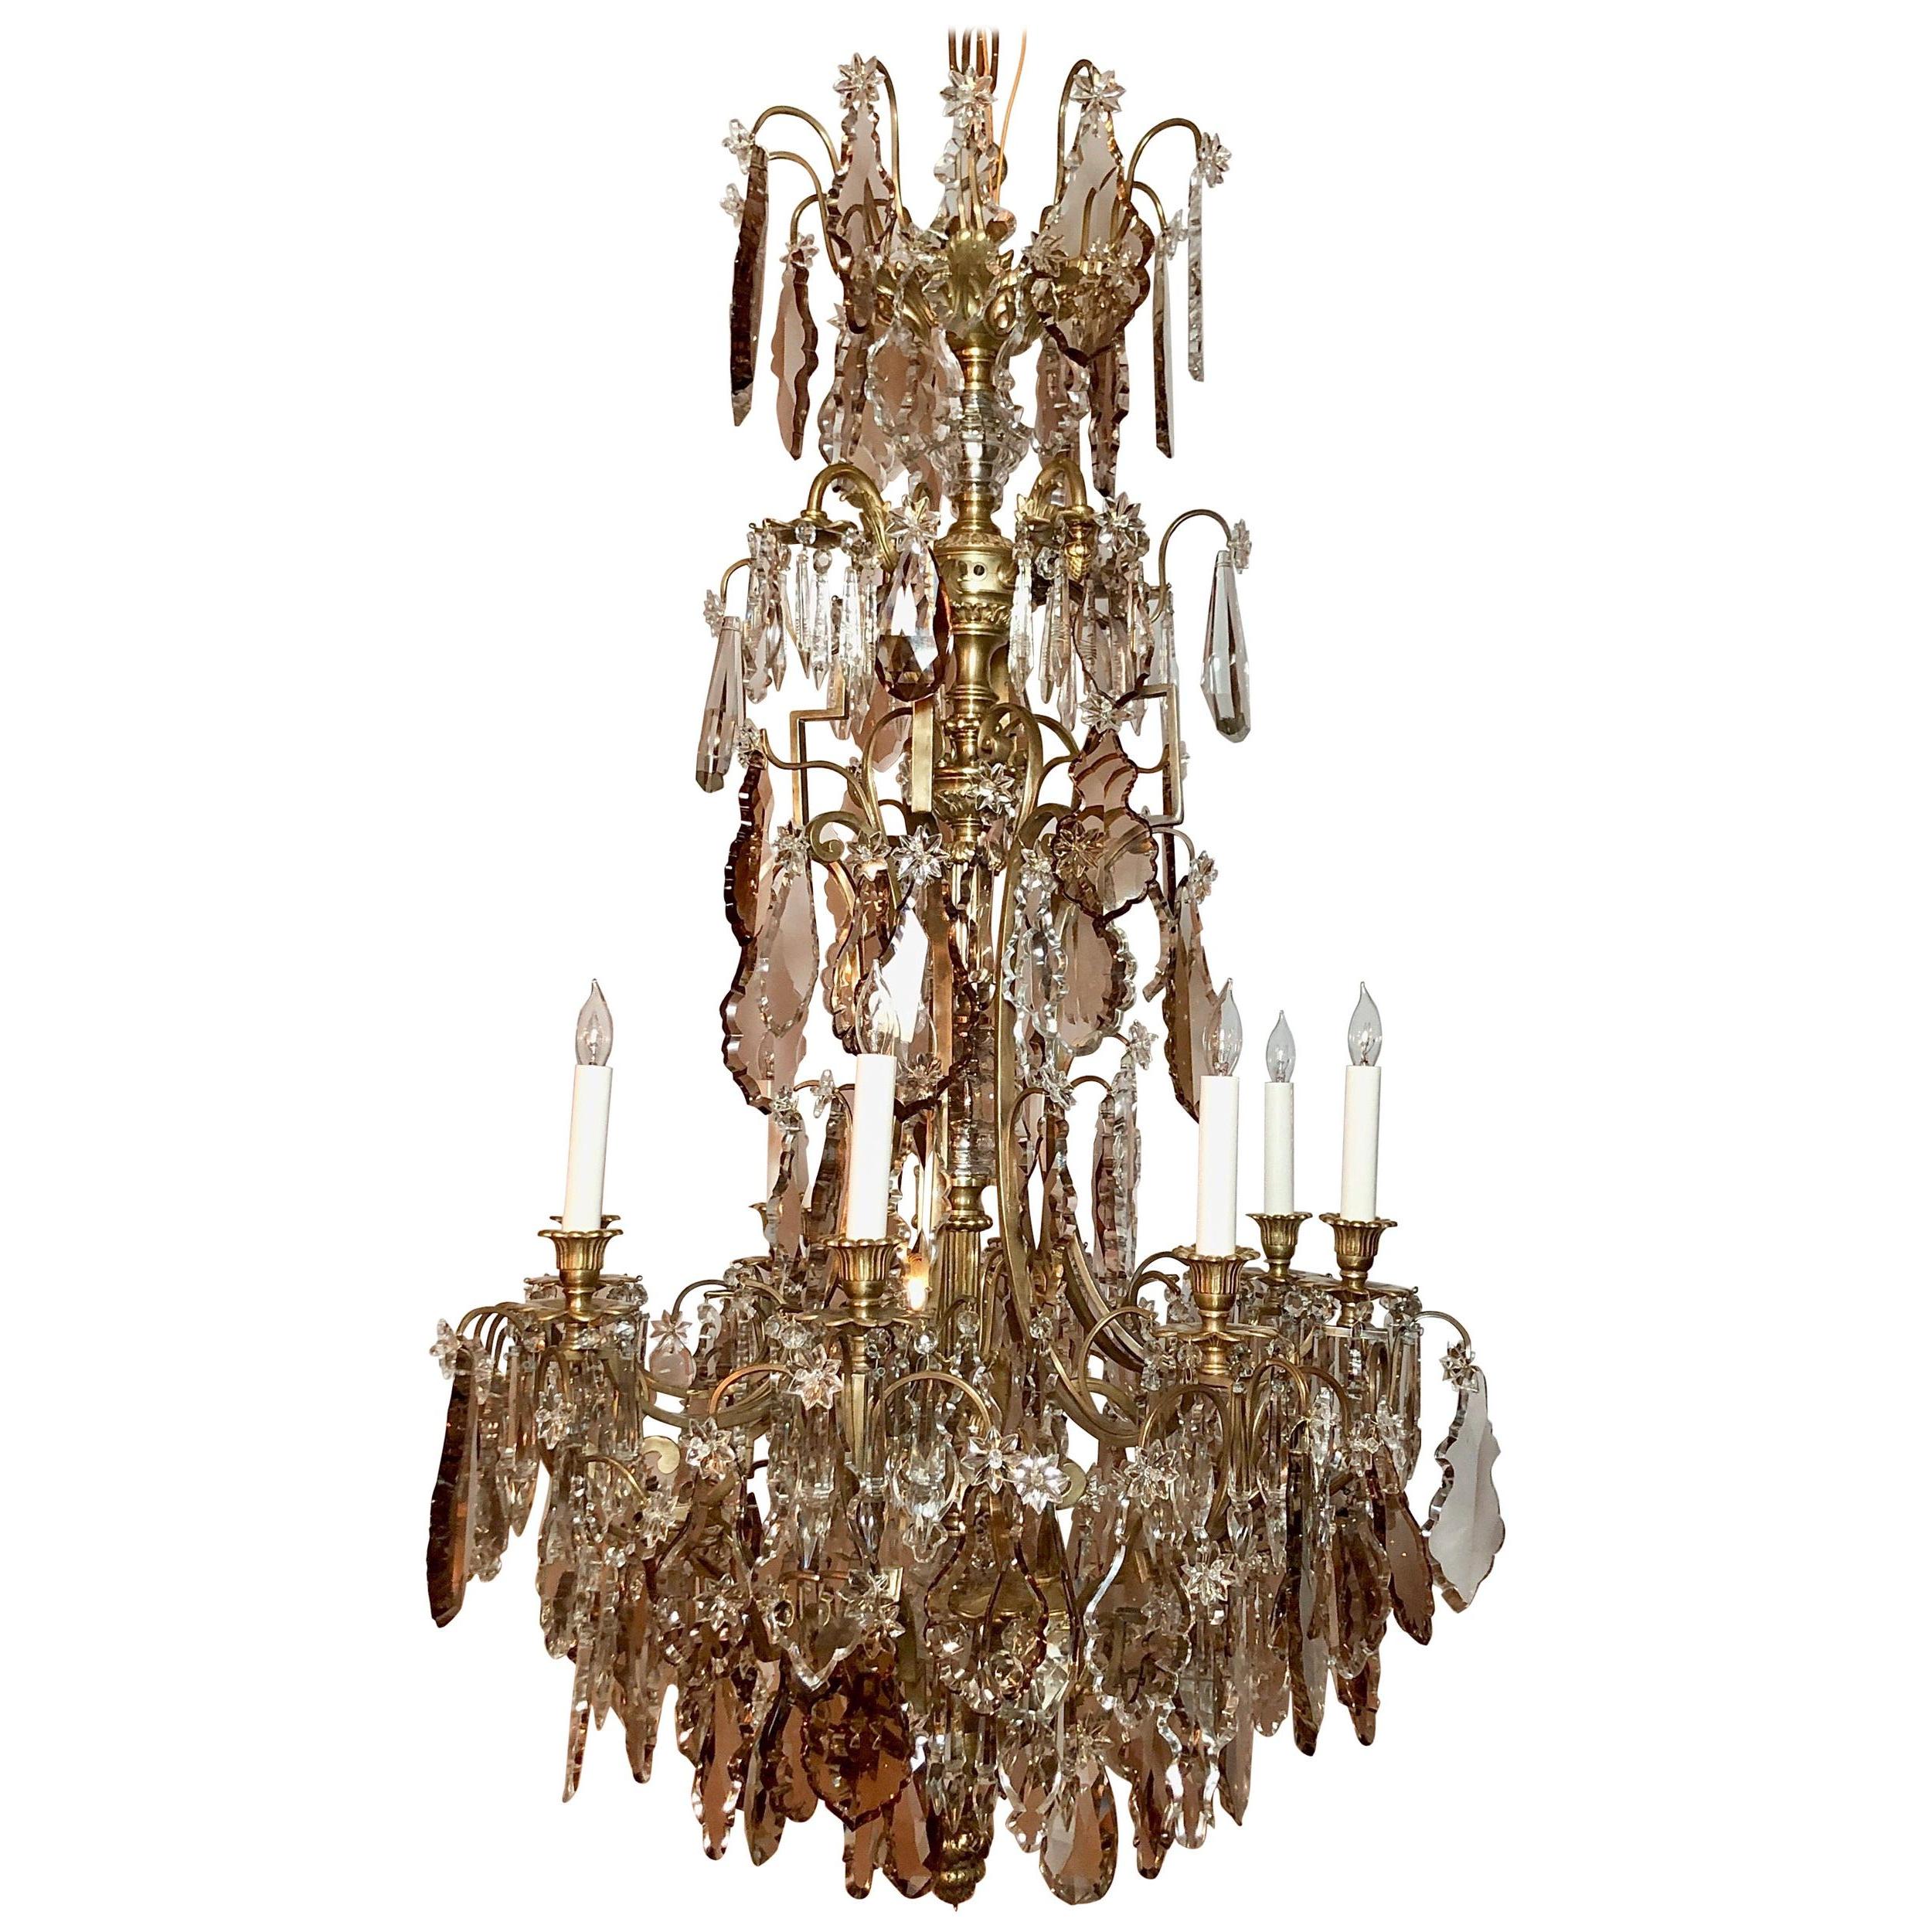 Antique French Gold Bronze & All Original Baccarat Crystal Chandelier Circa 1870 For Sale